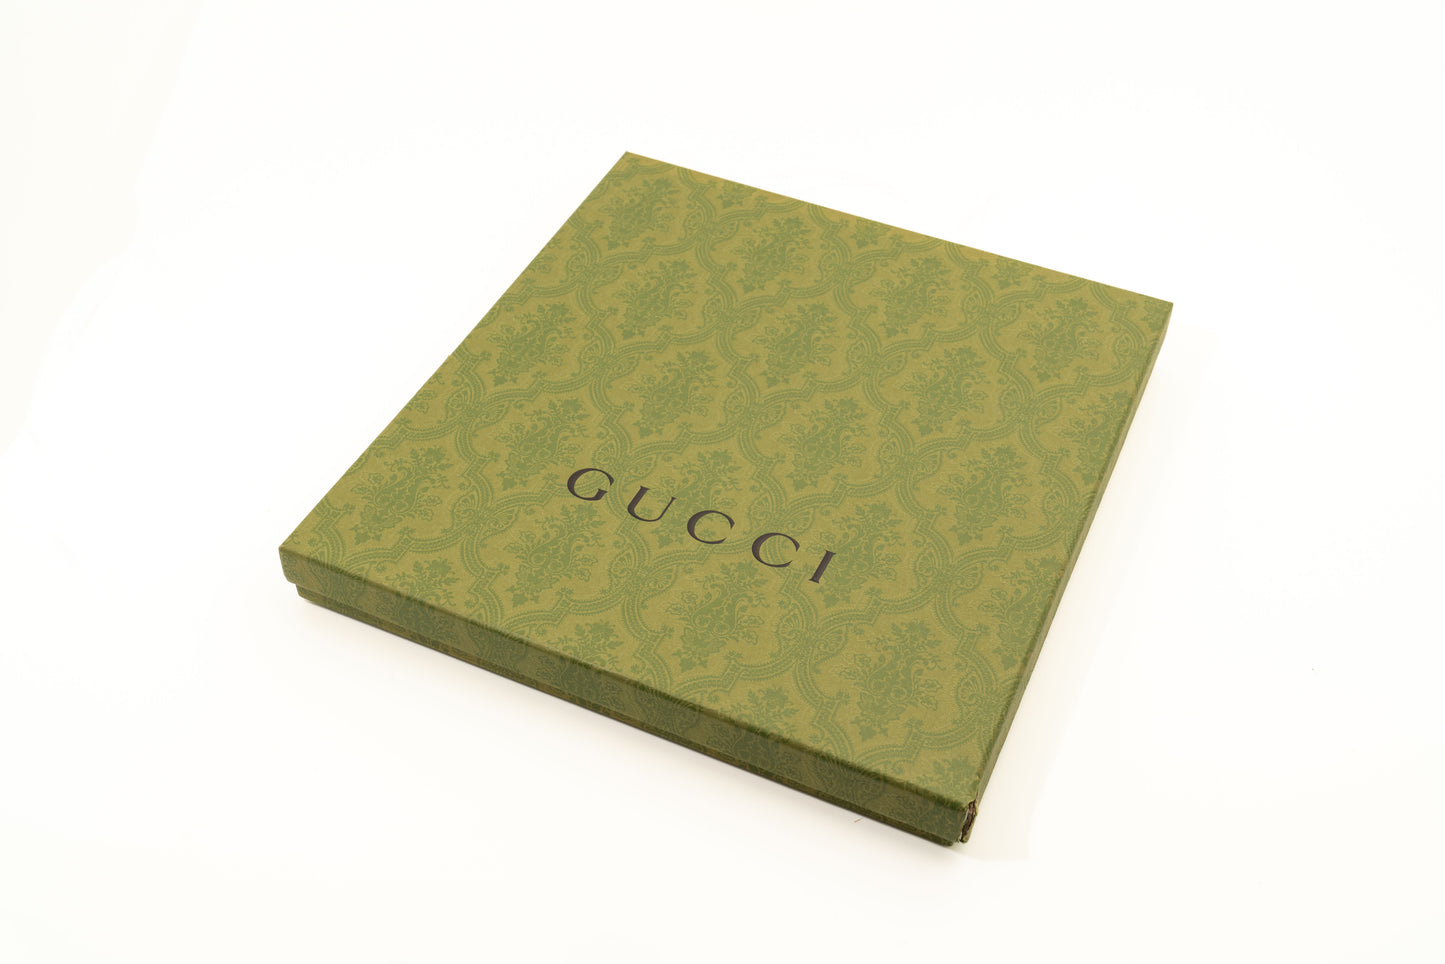 Gucci Canvas Kingsnake Pouch in Black Monogram SHW